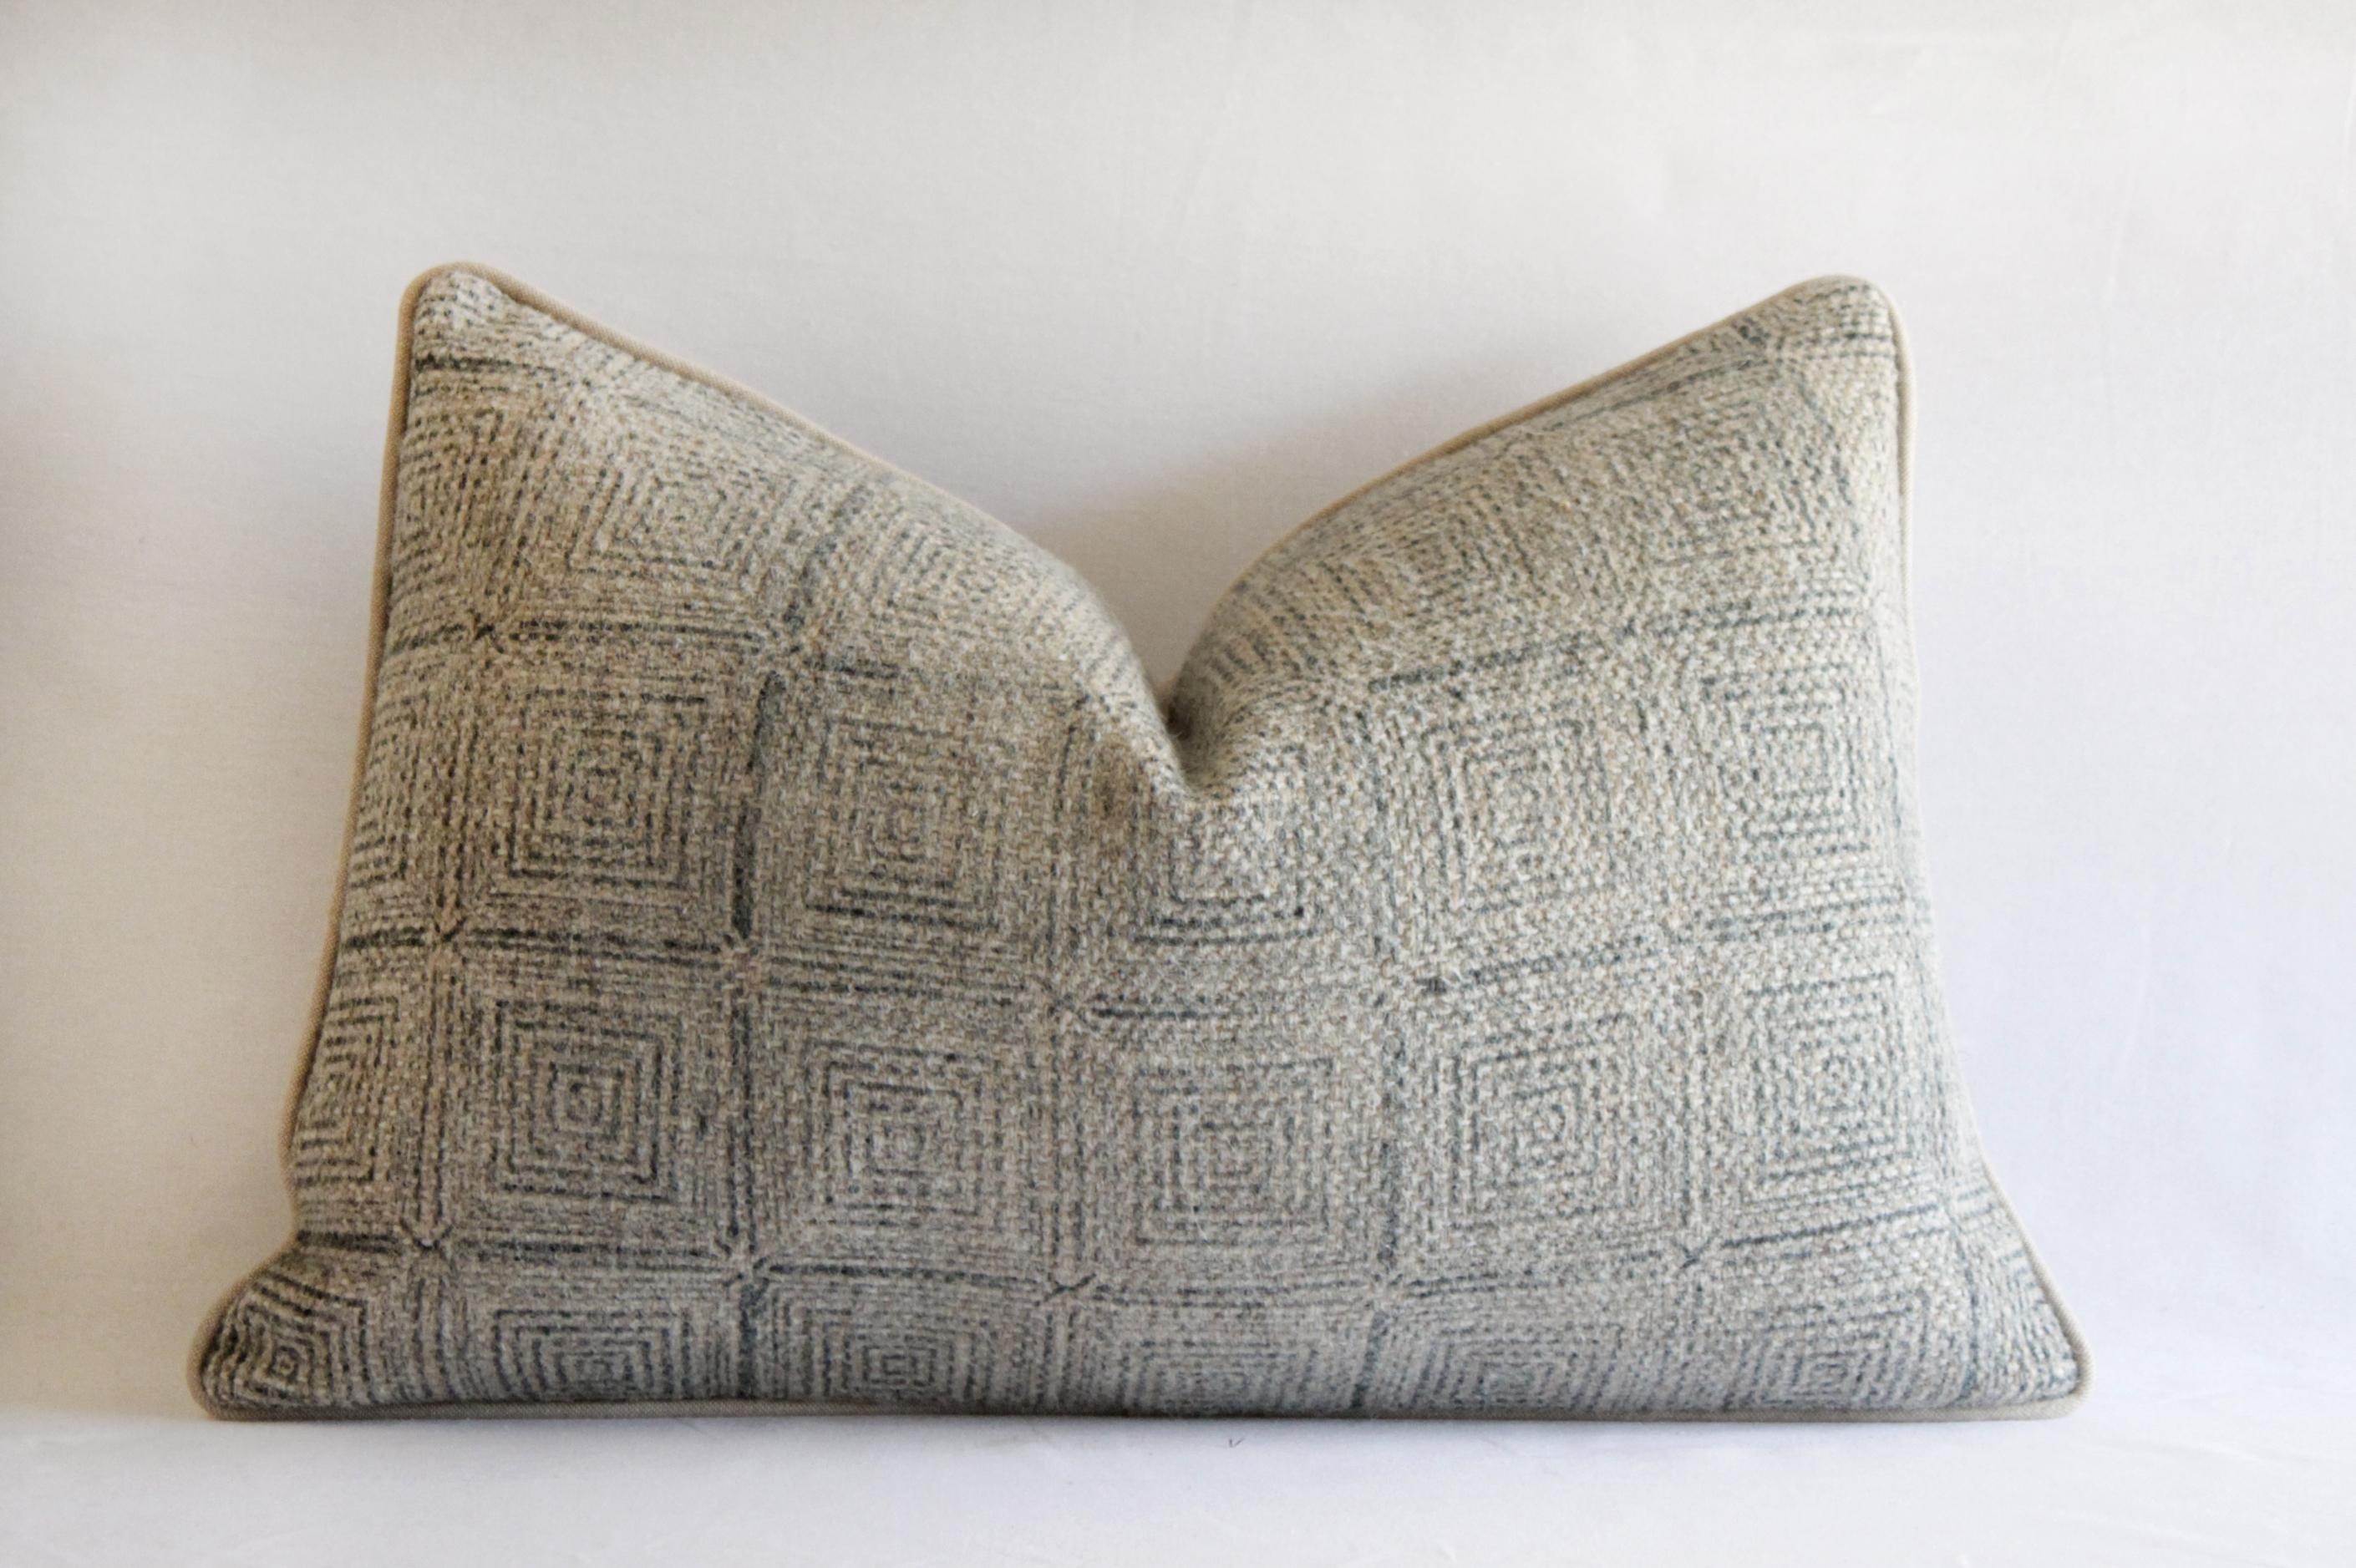 These luxurious wool lumbar pillows in tan and gray pattern
These pillows have a piped edge, and hidden zipper closure. The backside is finished in a coordinating canvas material. There are 2 available, please enter your quantity. Insert not